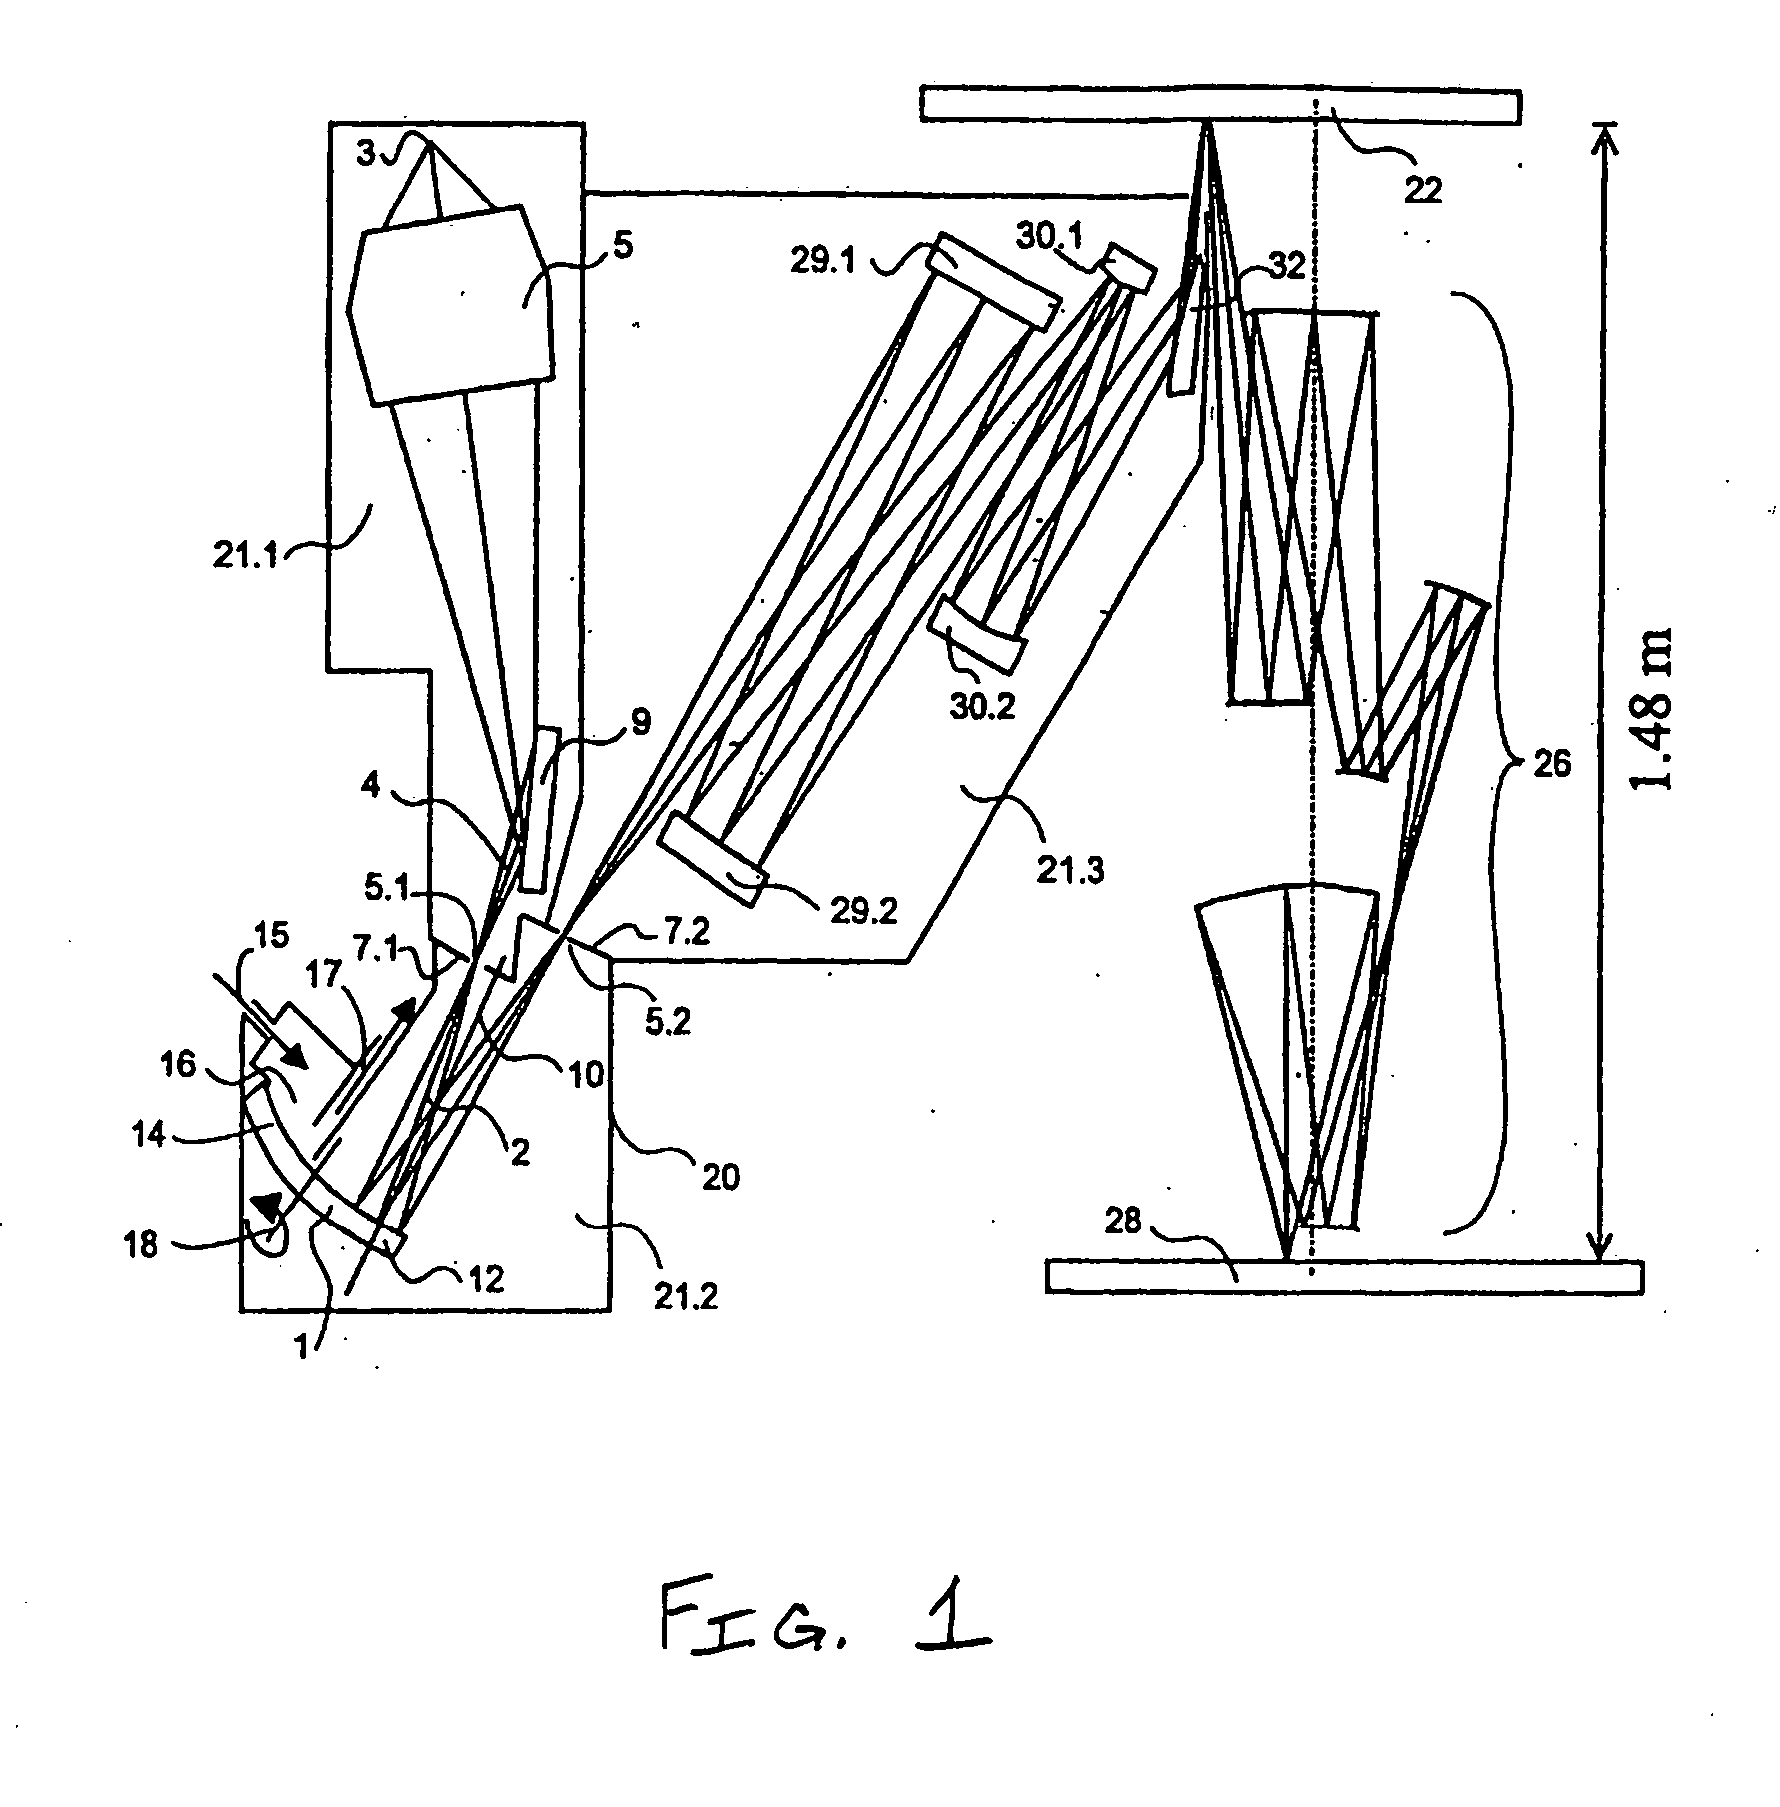 EUV-lithography apparatus having a chamber for cleaning an optical element